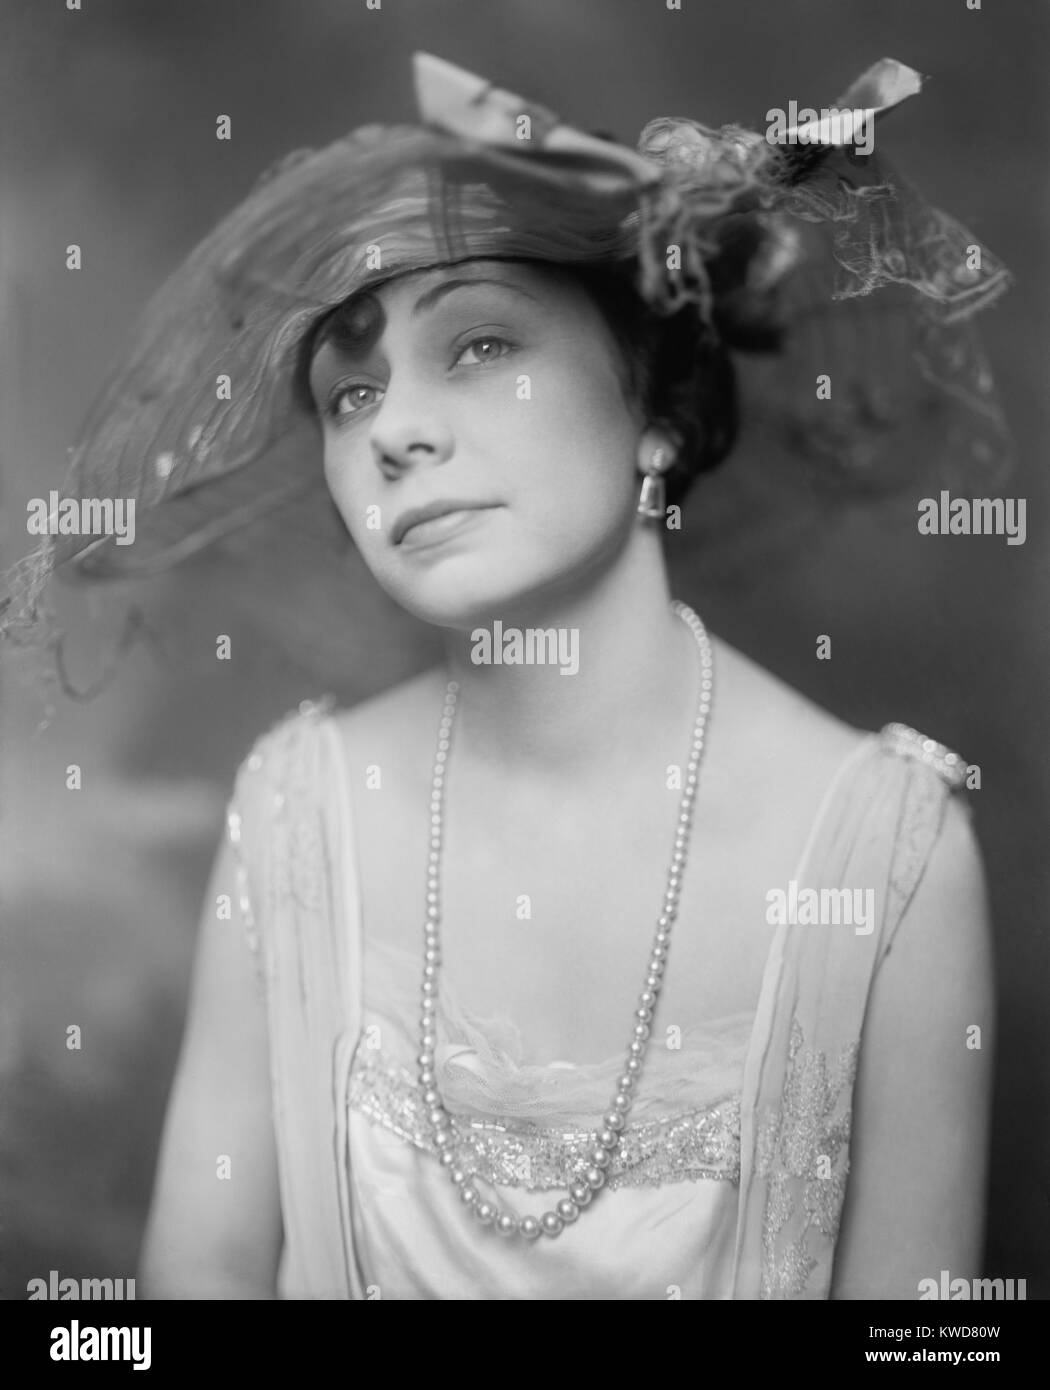 New York Socialite Miss Inez Thomas modeling a hat, long string of pearls, and evening gown. Ca. 1920. (BSLOC 2015 16 245) Stock Photo